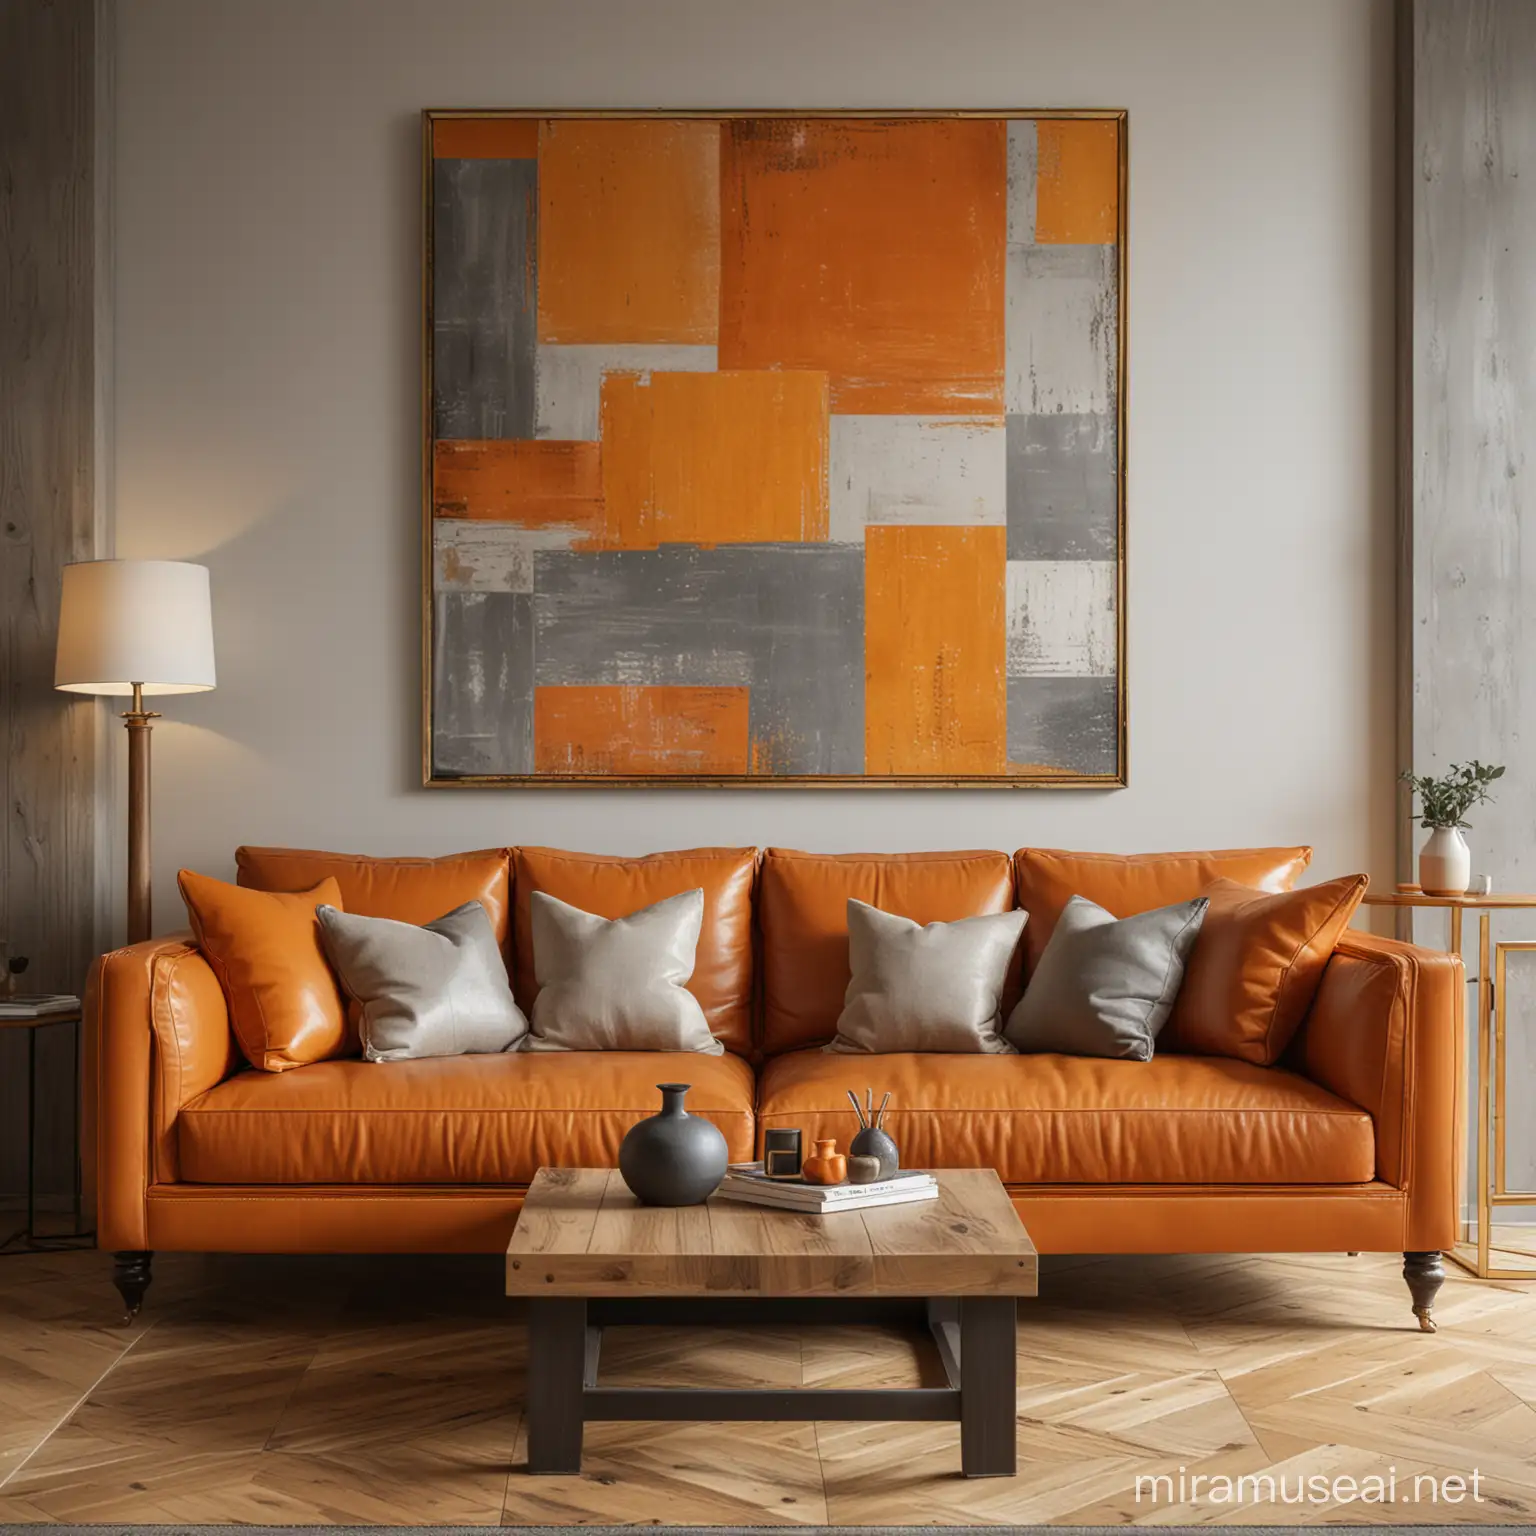 A living room with wooden floor and wooden posts in orange and gray, behind the golden leather sofa hangs a square picture, vivid, detailed, light and shadow